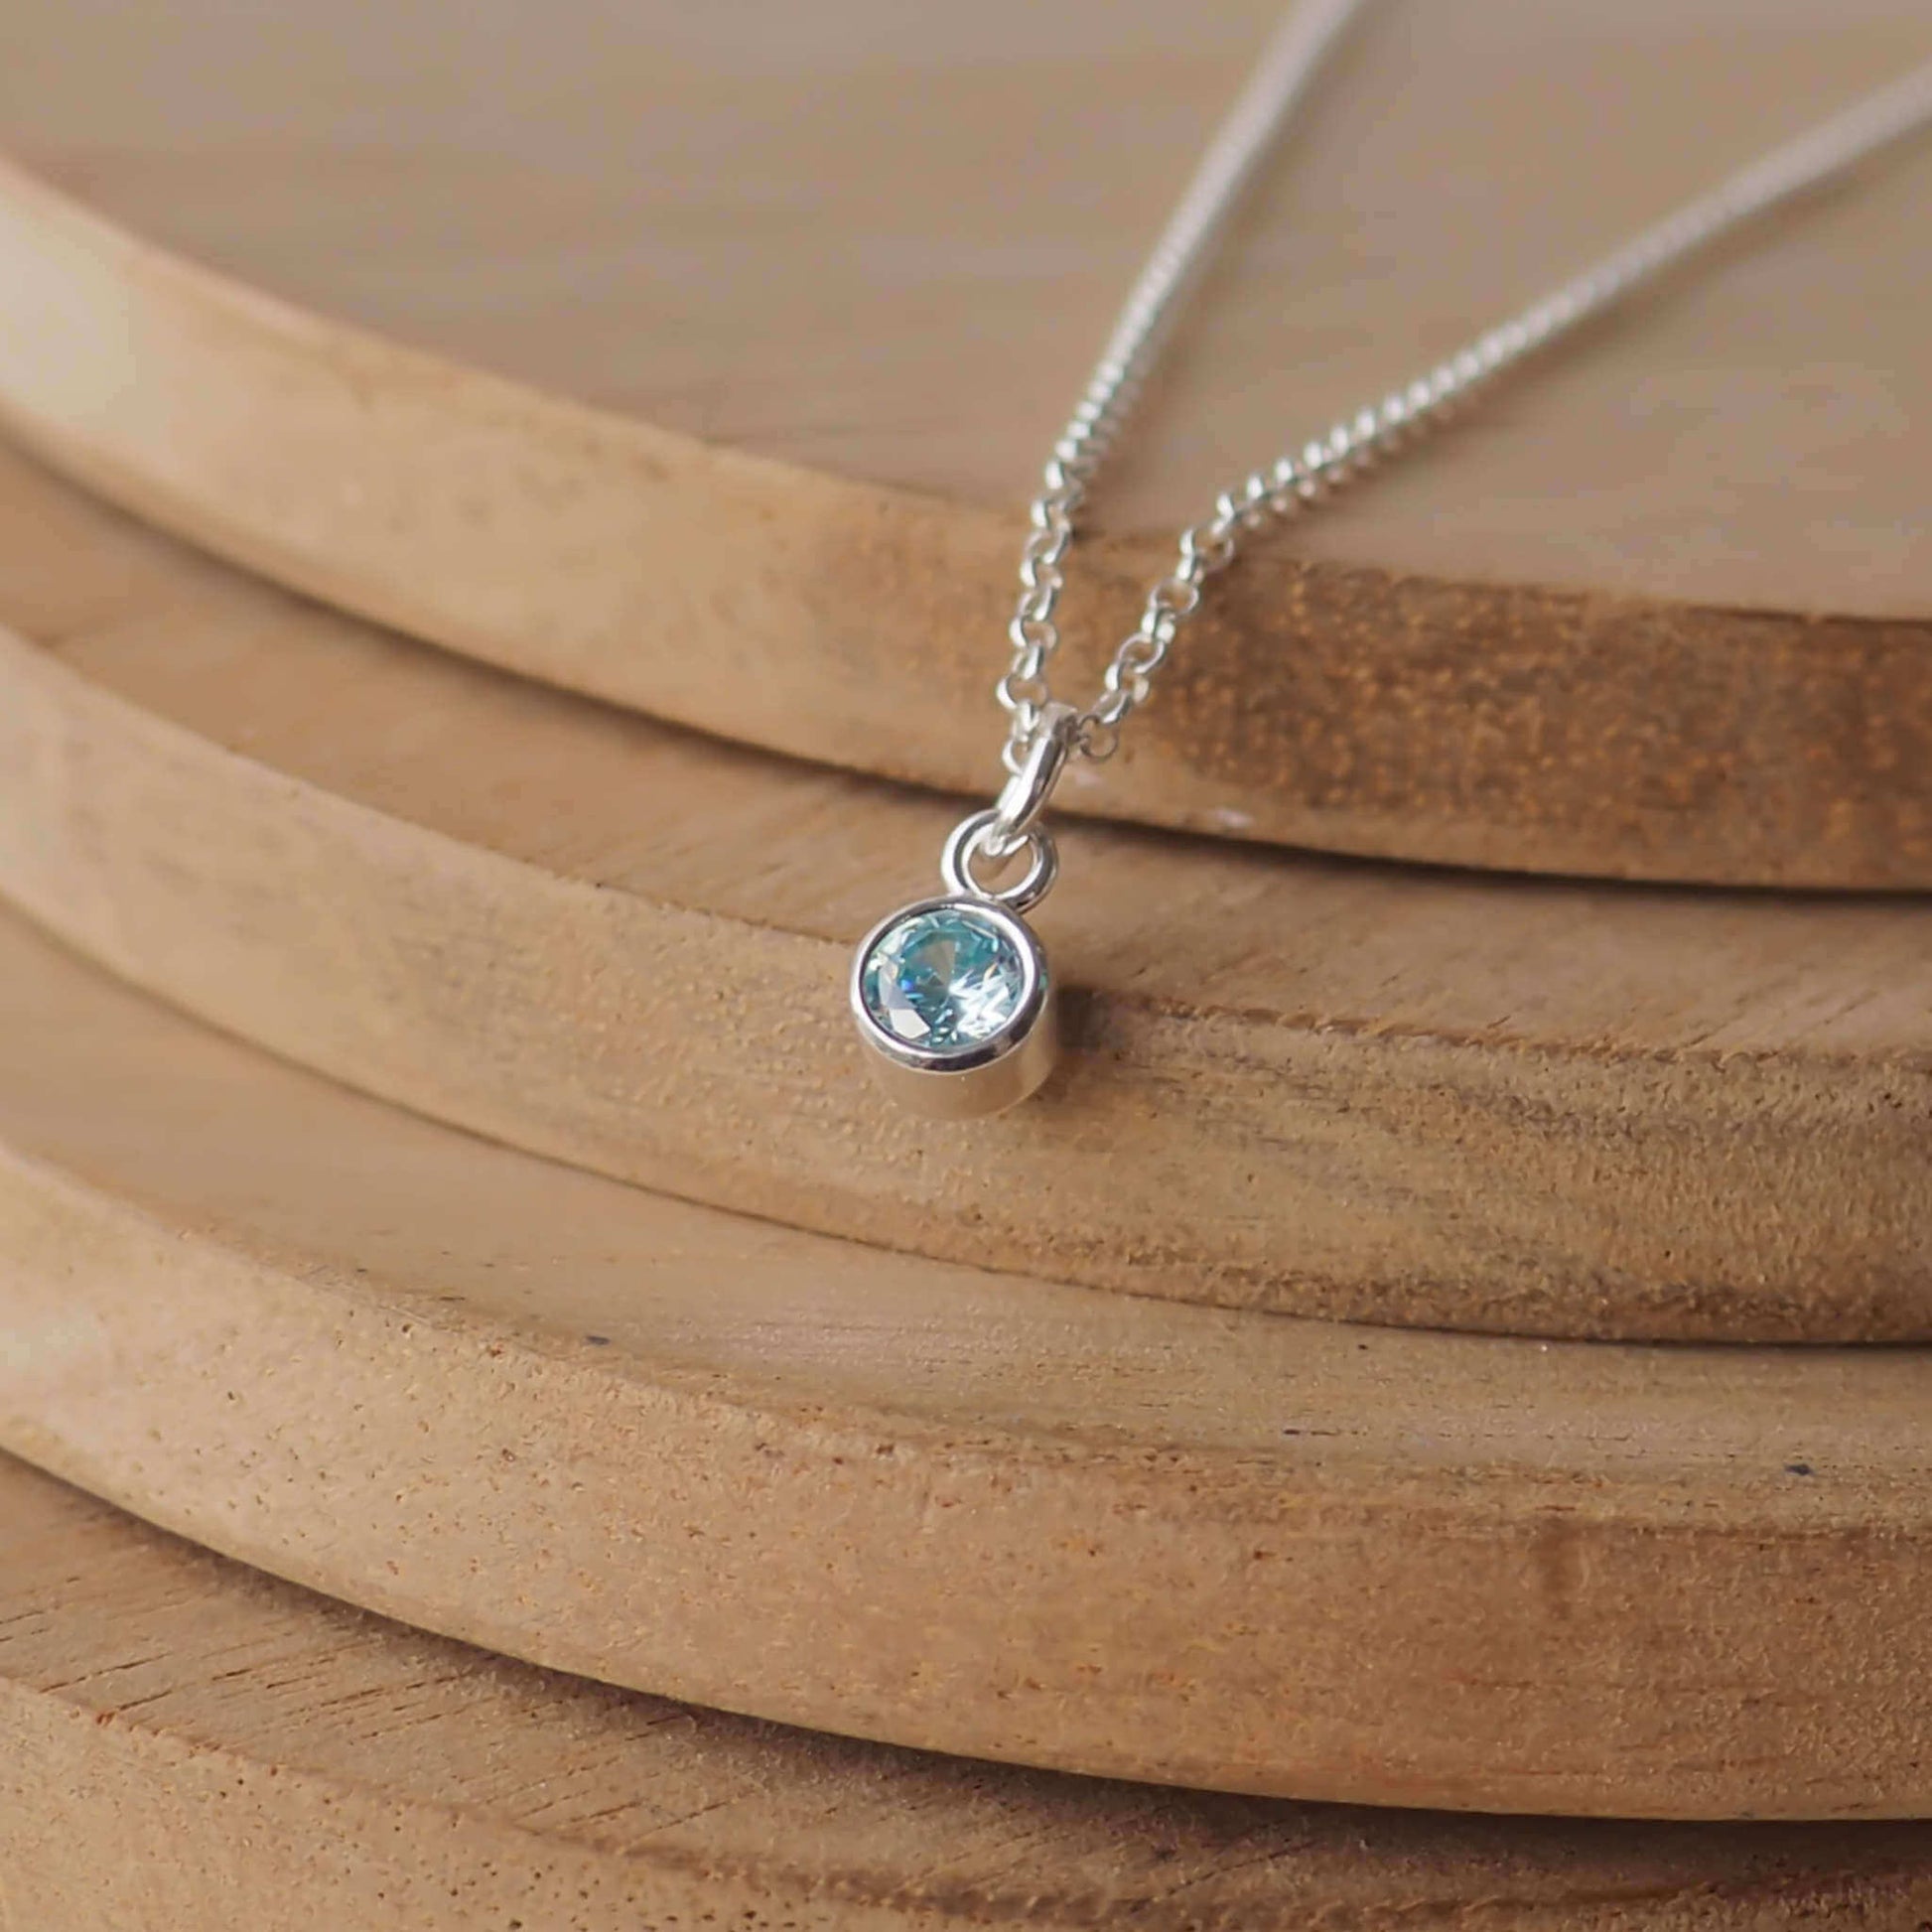 Petite Sterling Silver and Cubic Zirconia Aquamarine necklace with March Birthstone. A small 4mm faceted round pale blue gemstone with a simple silver setting on a trace style chain. Handmade in Scotland by Maram Jewellery